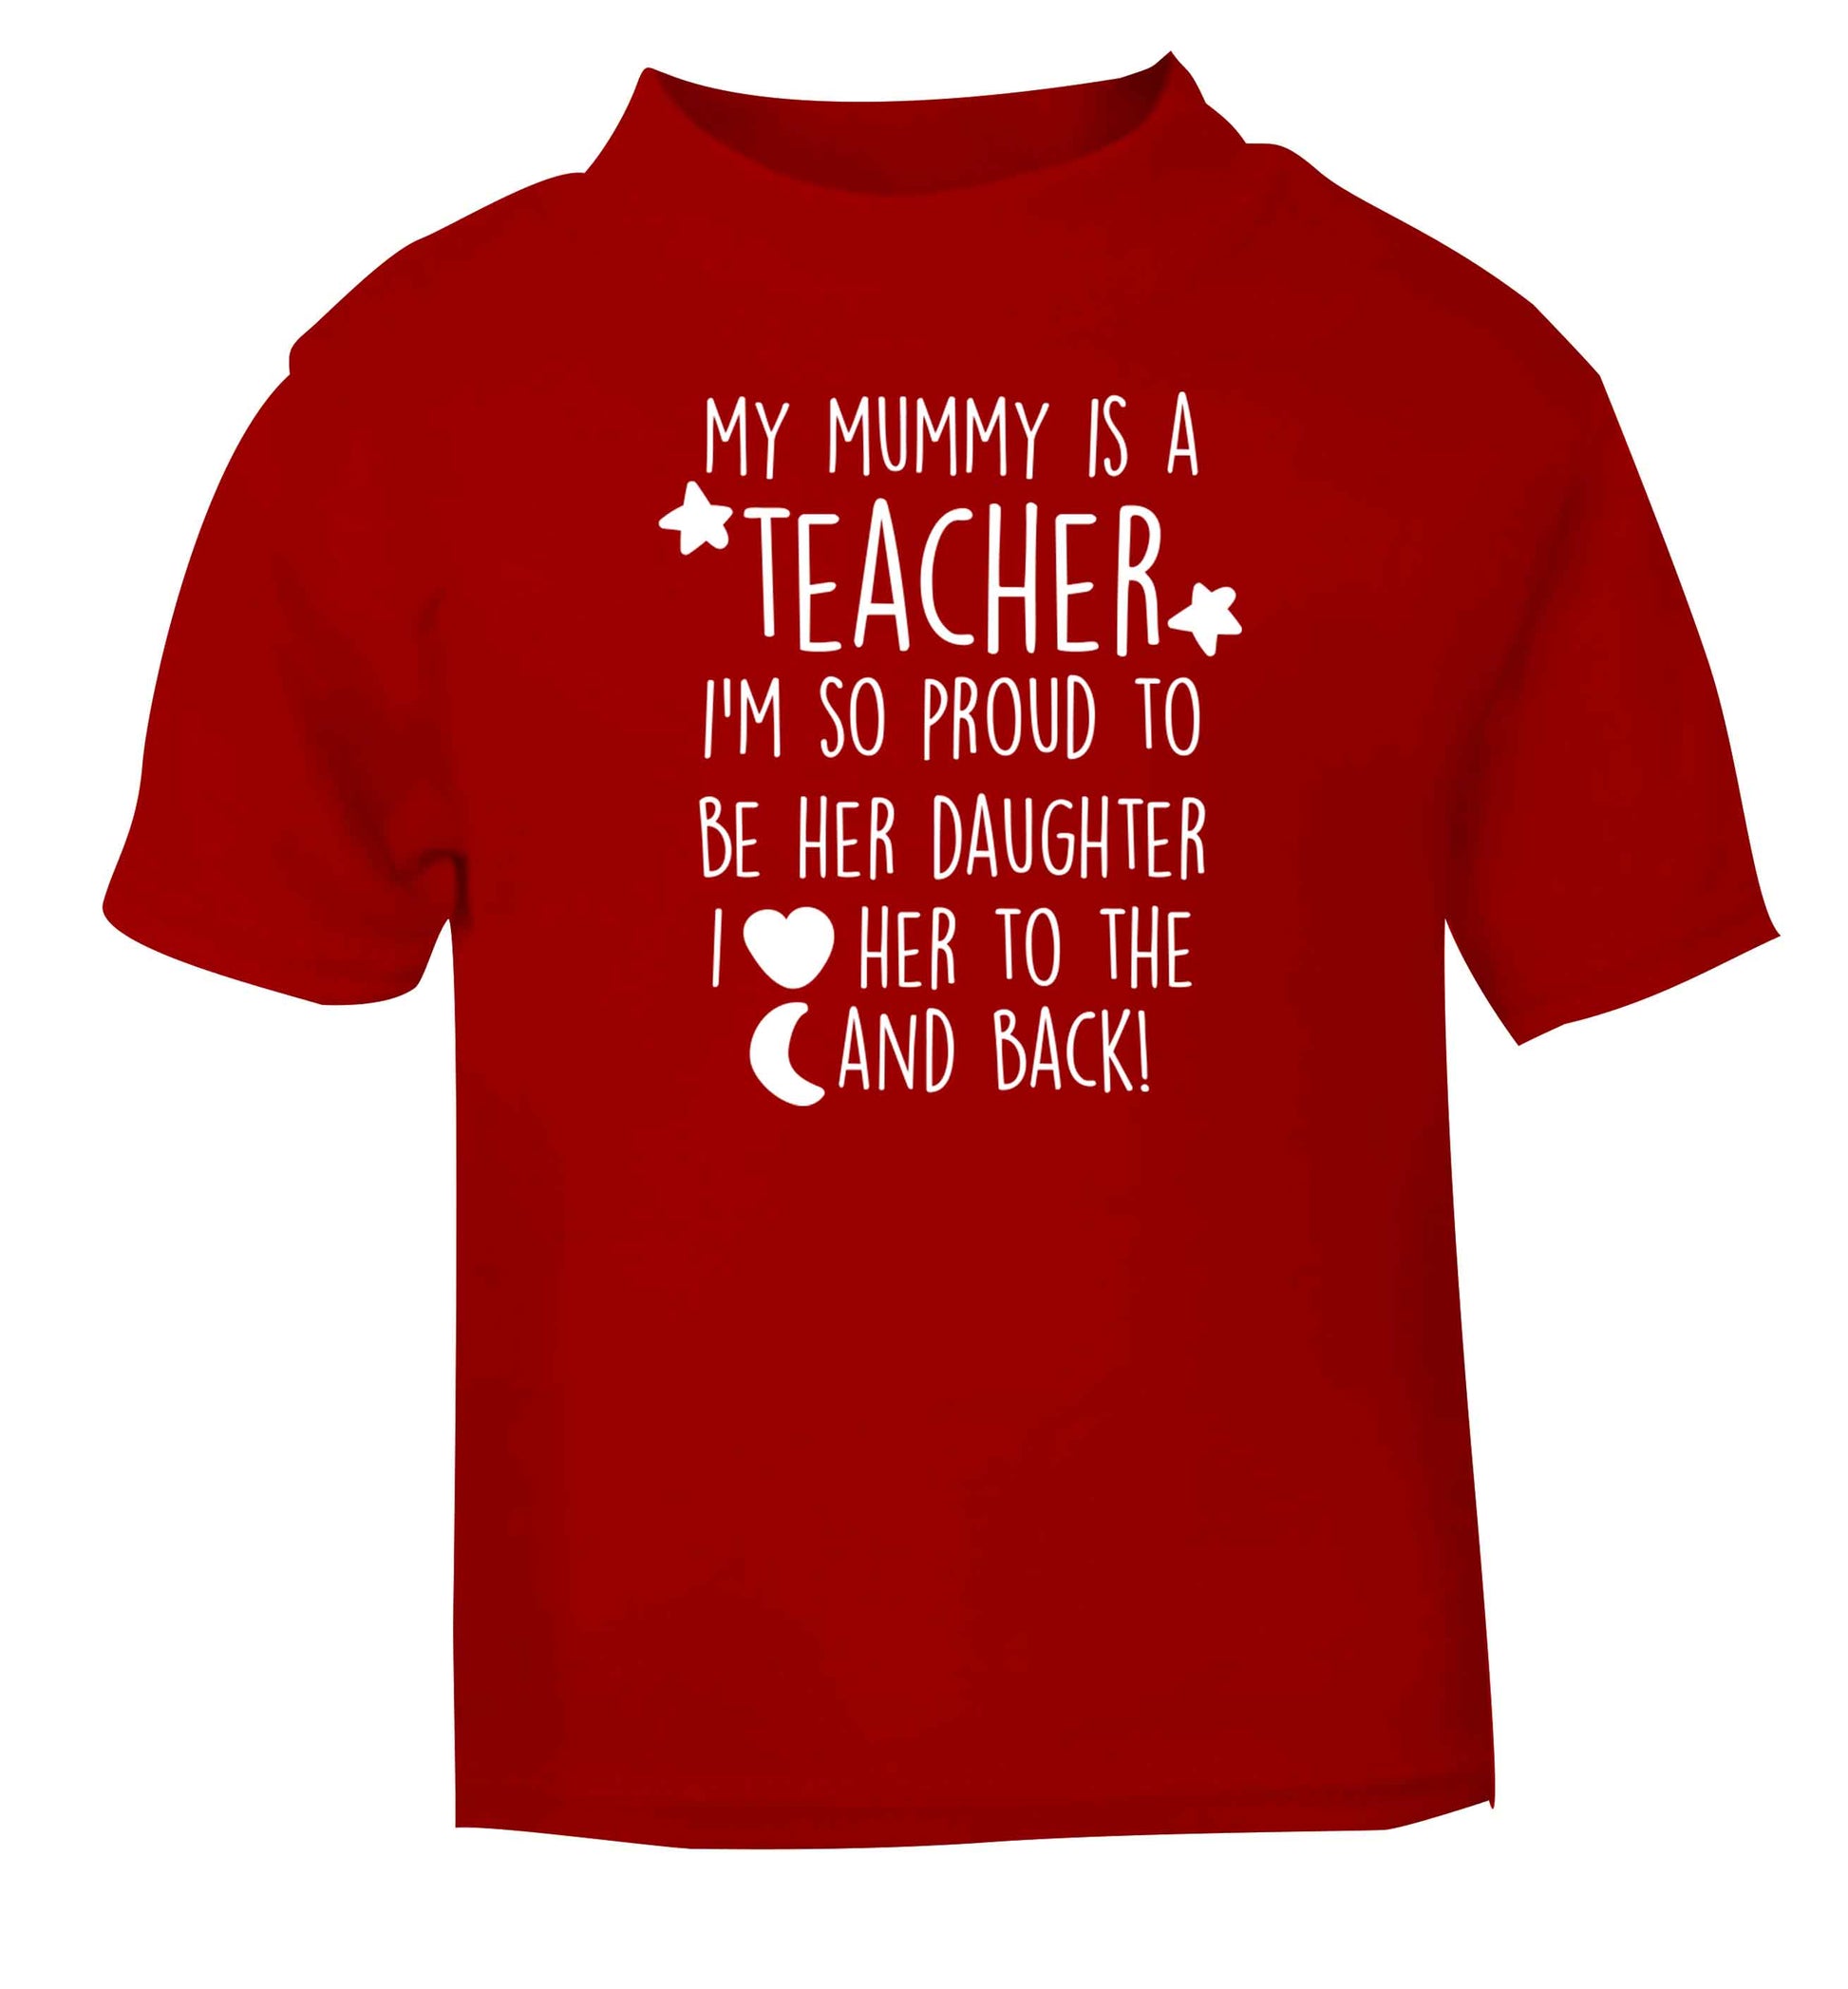 My mummy is a teacher I'm so proud to be her daughter I love her to the moon and back red baby toddler Tshirt 2 Years